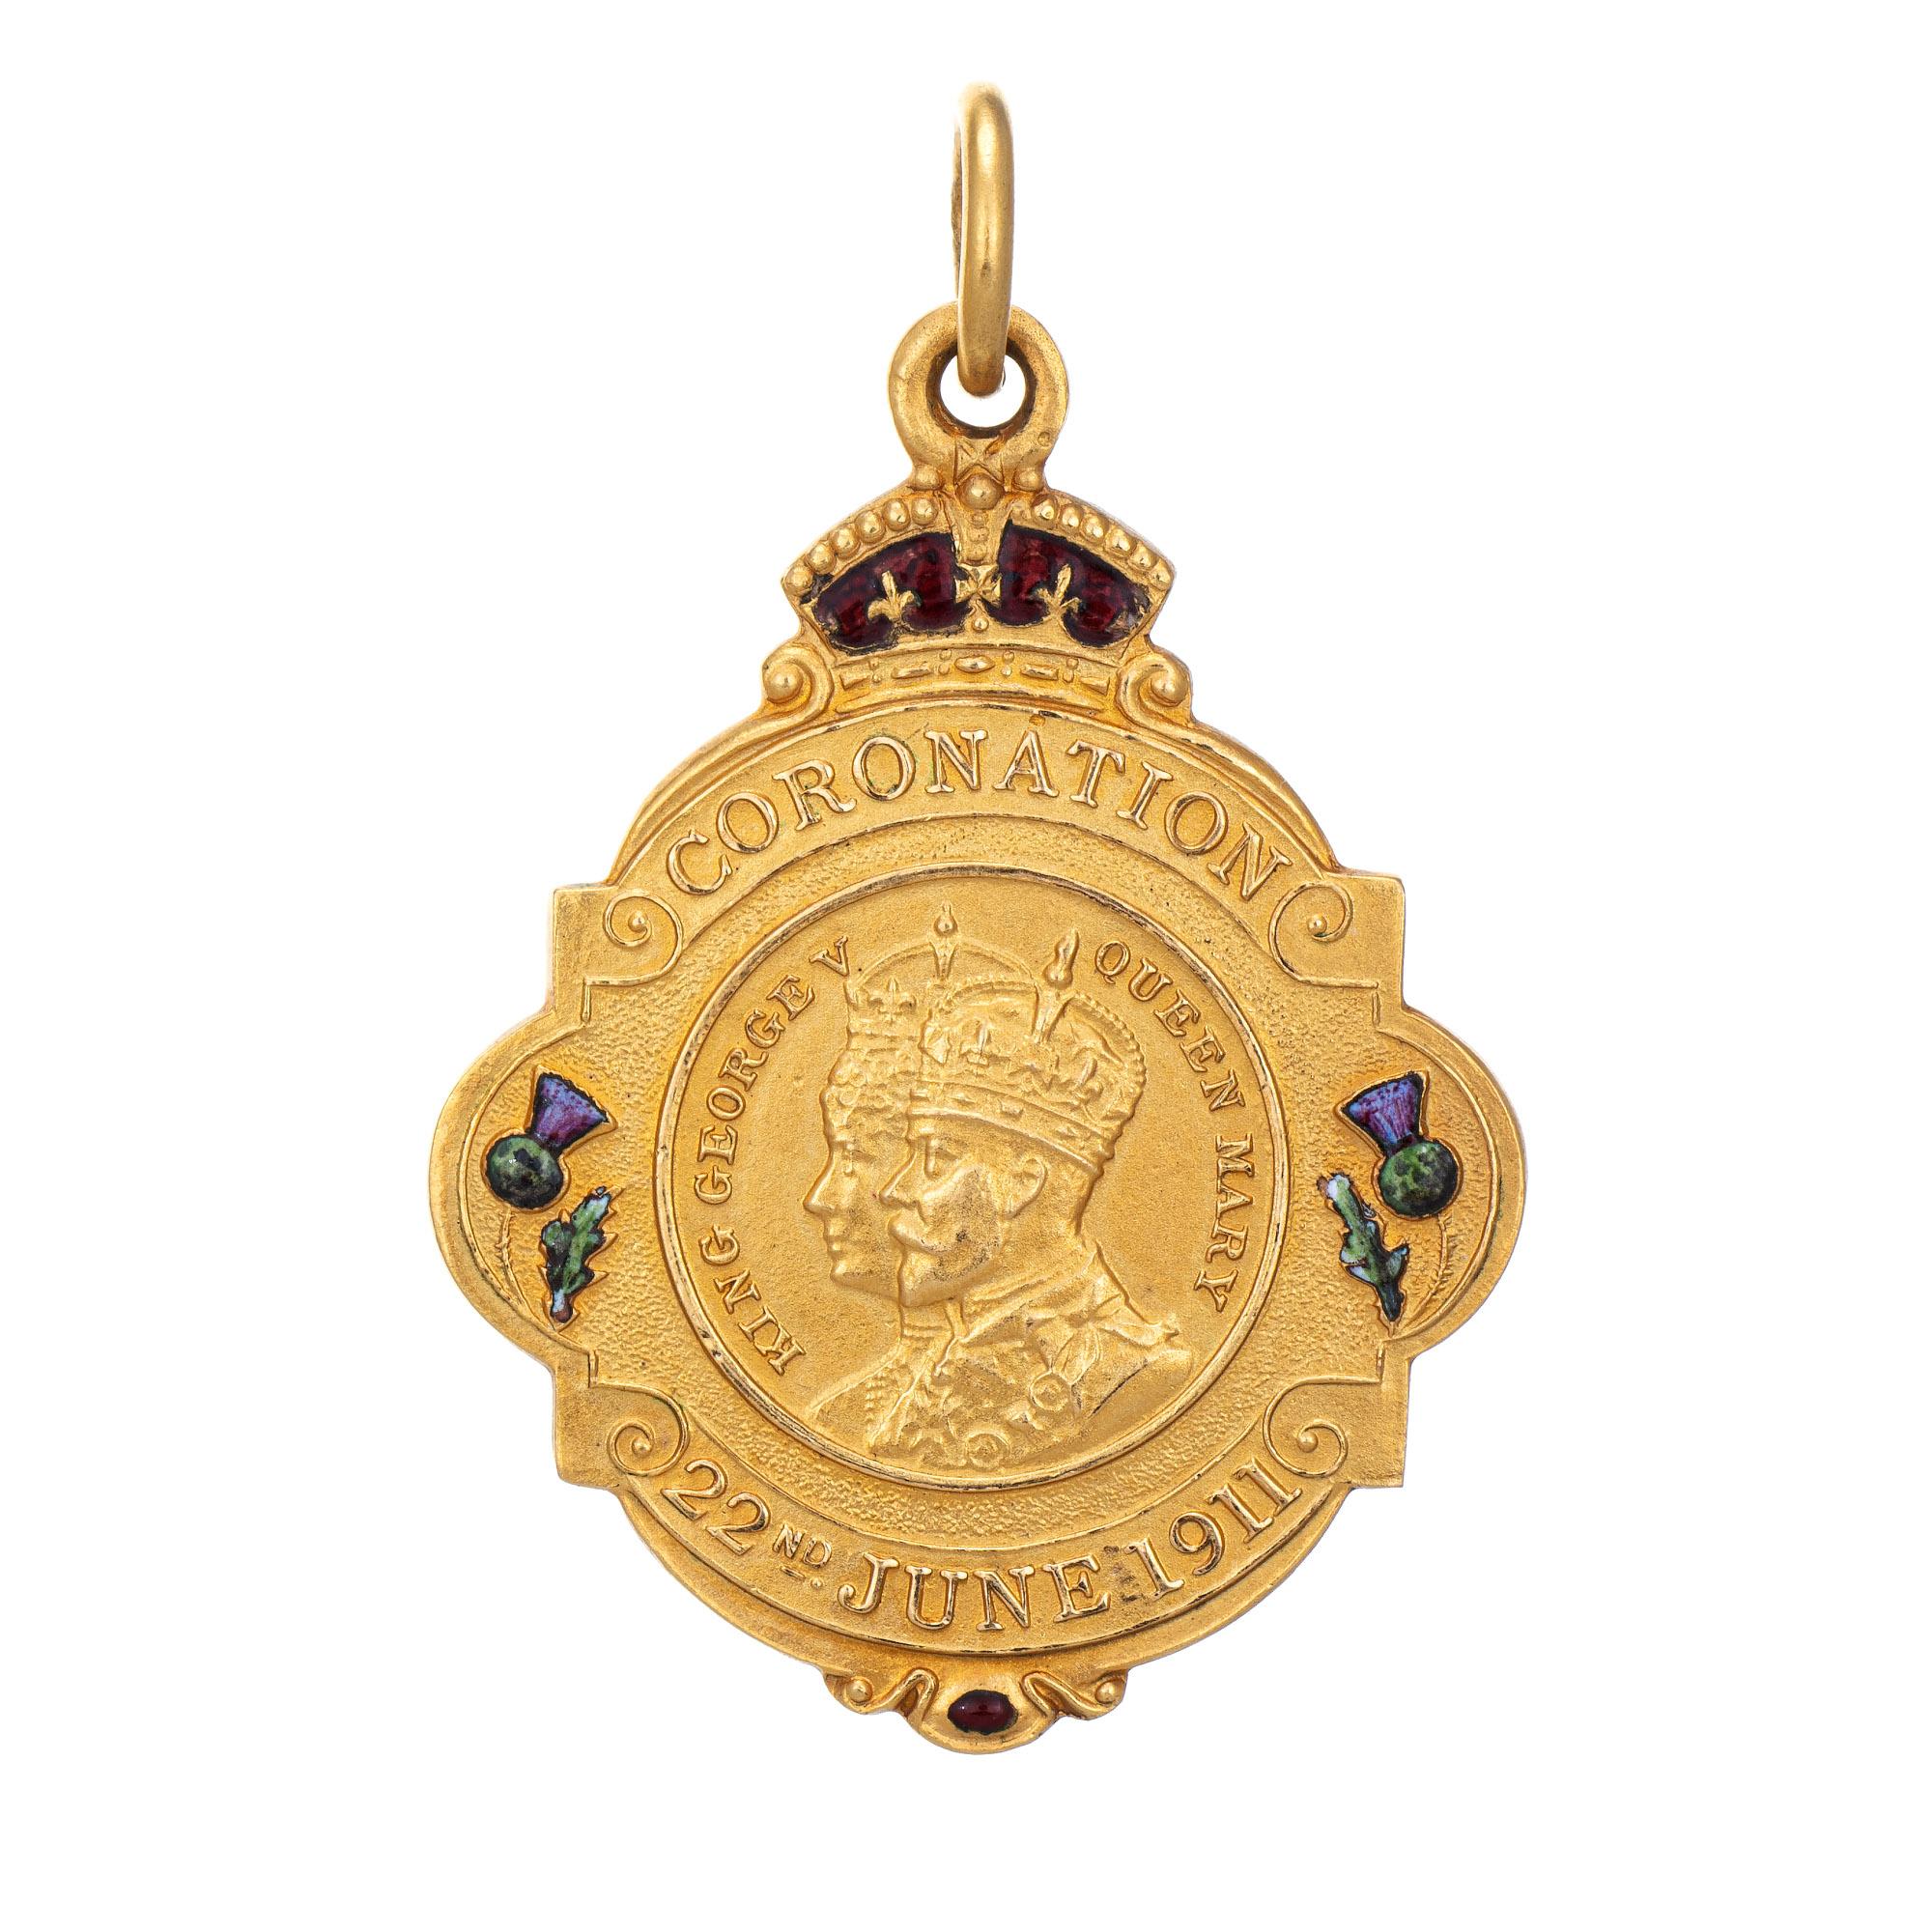 Elaborate antique Edwardian era medallion (circa 1911) crafted in 15 karat yellow gold. 

The beautifully detailed medallion dates to 1911 and commemorates the coronation of King George V and Queen Mary on June 22nd. Colorful and elaborate enamel